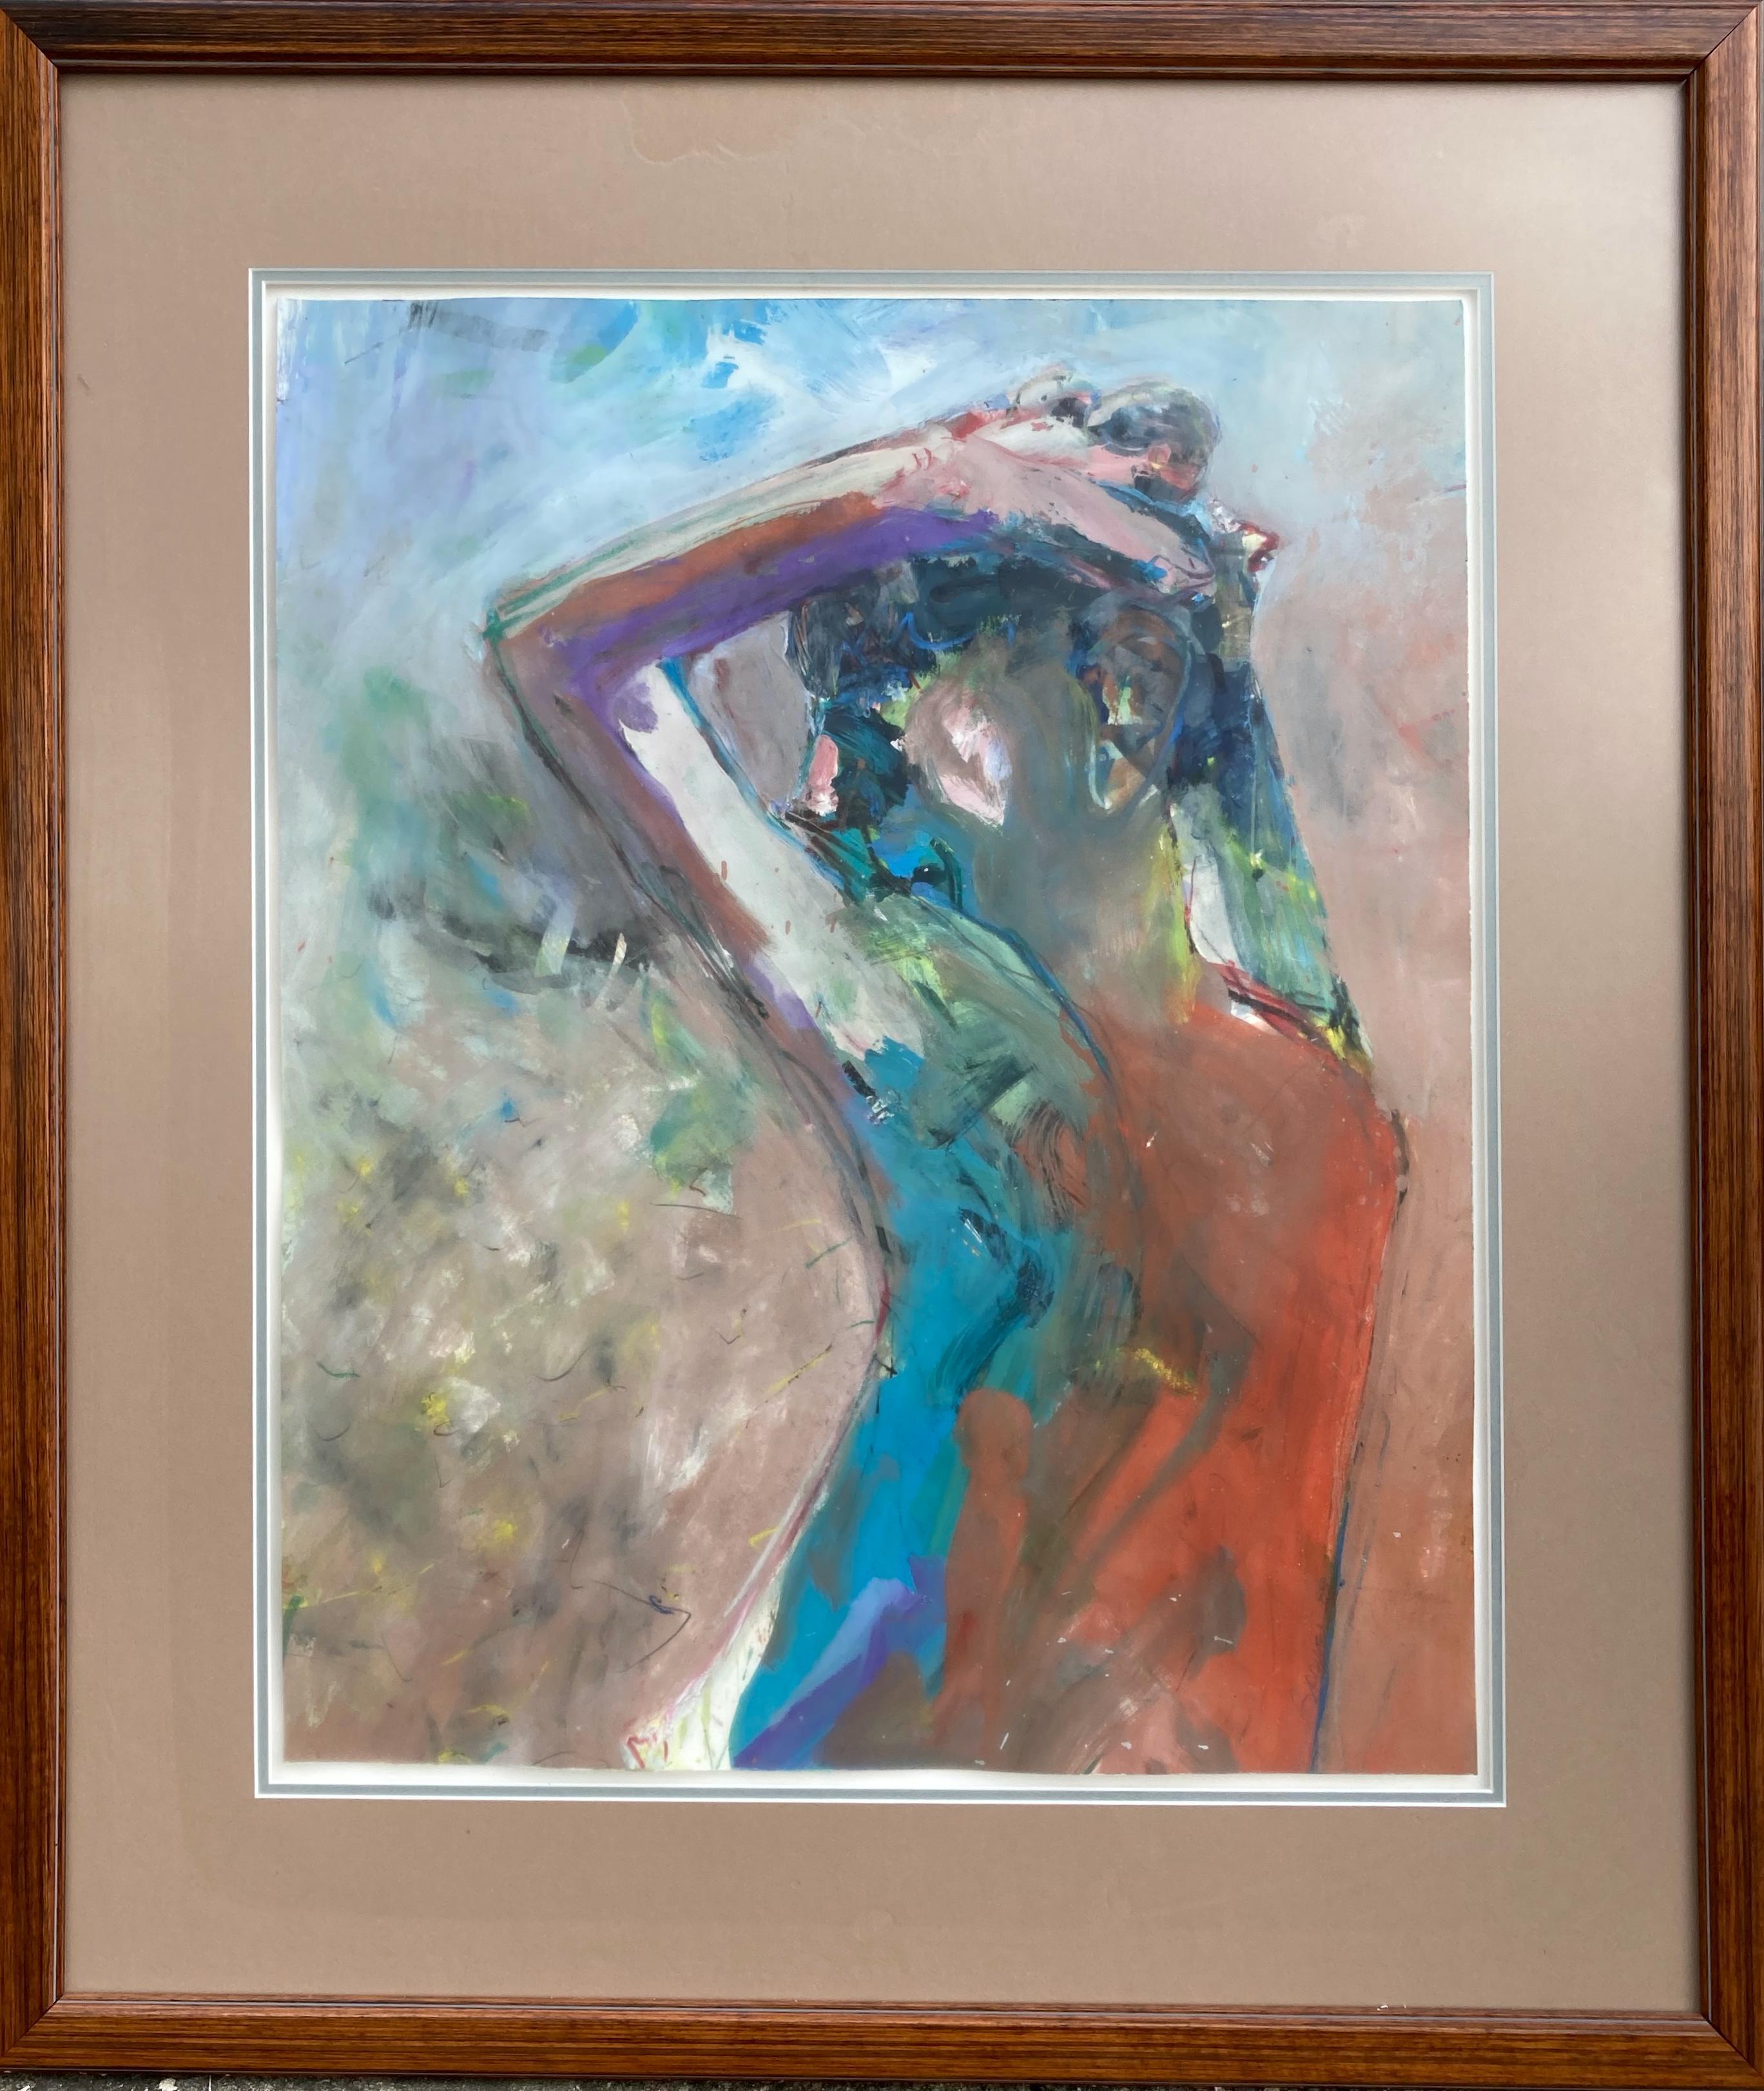 Alexander Barnes Abstract Painting - "Untitled" - Portrait of a Woman, Framed Modern Late 20th Century Painting